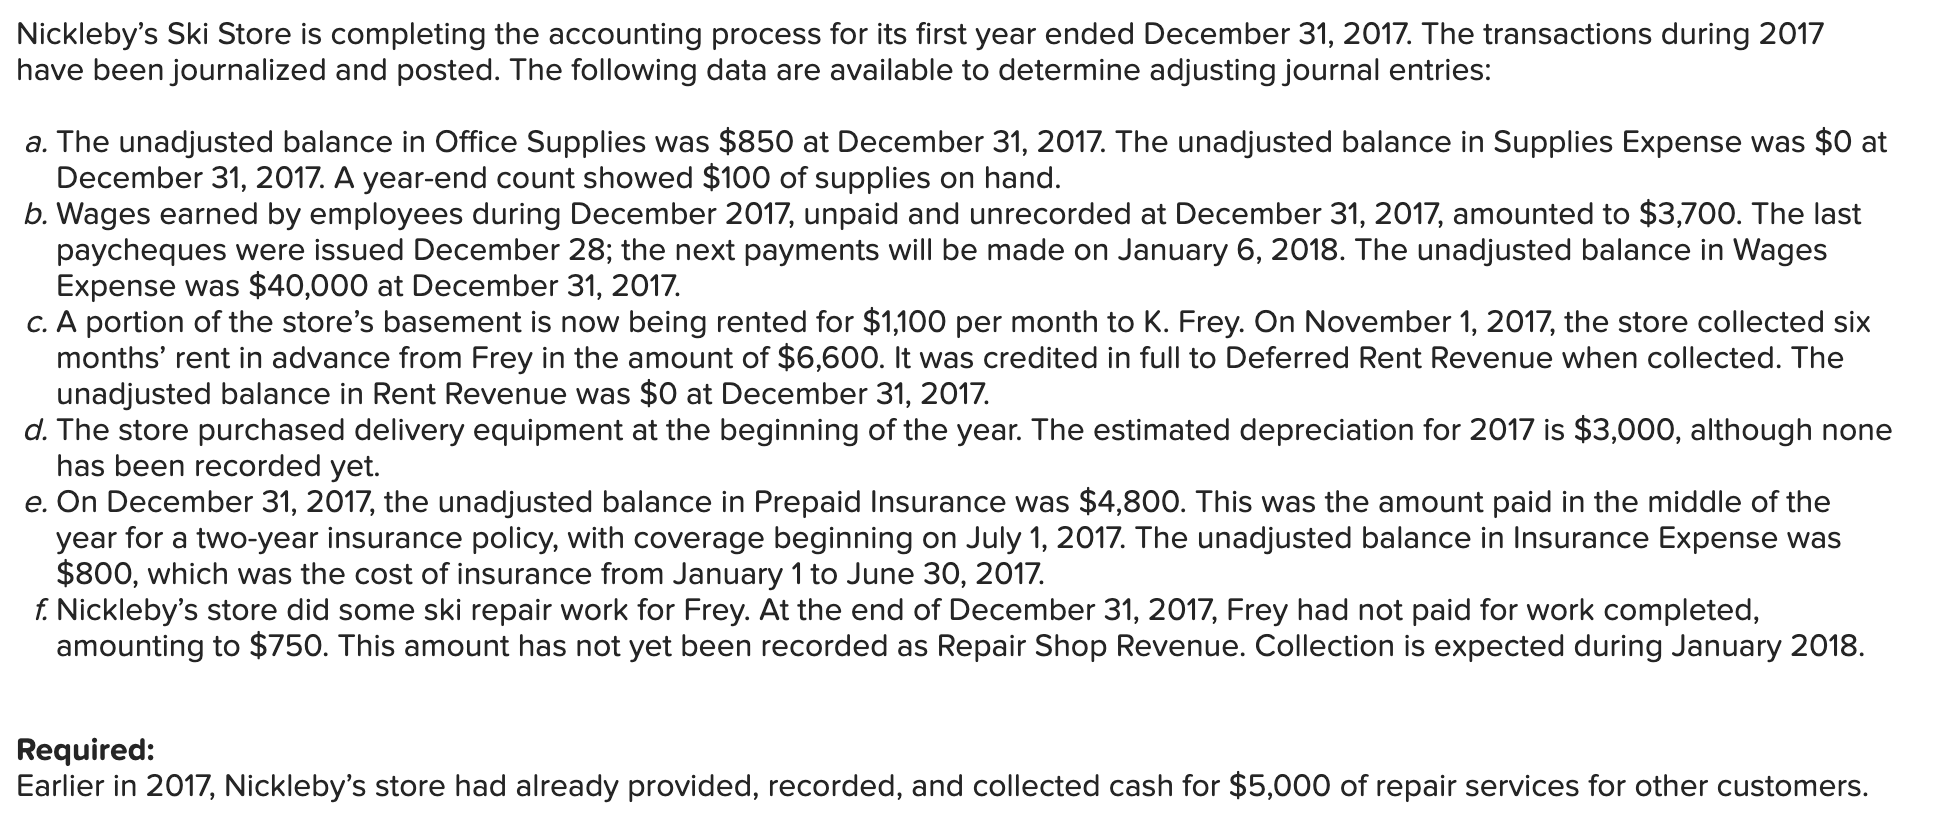 Nicklebys ski store is completing the accounting process for its first year ended december 31, 2017. the transactions during